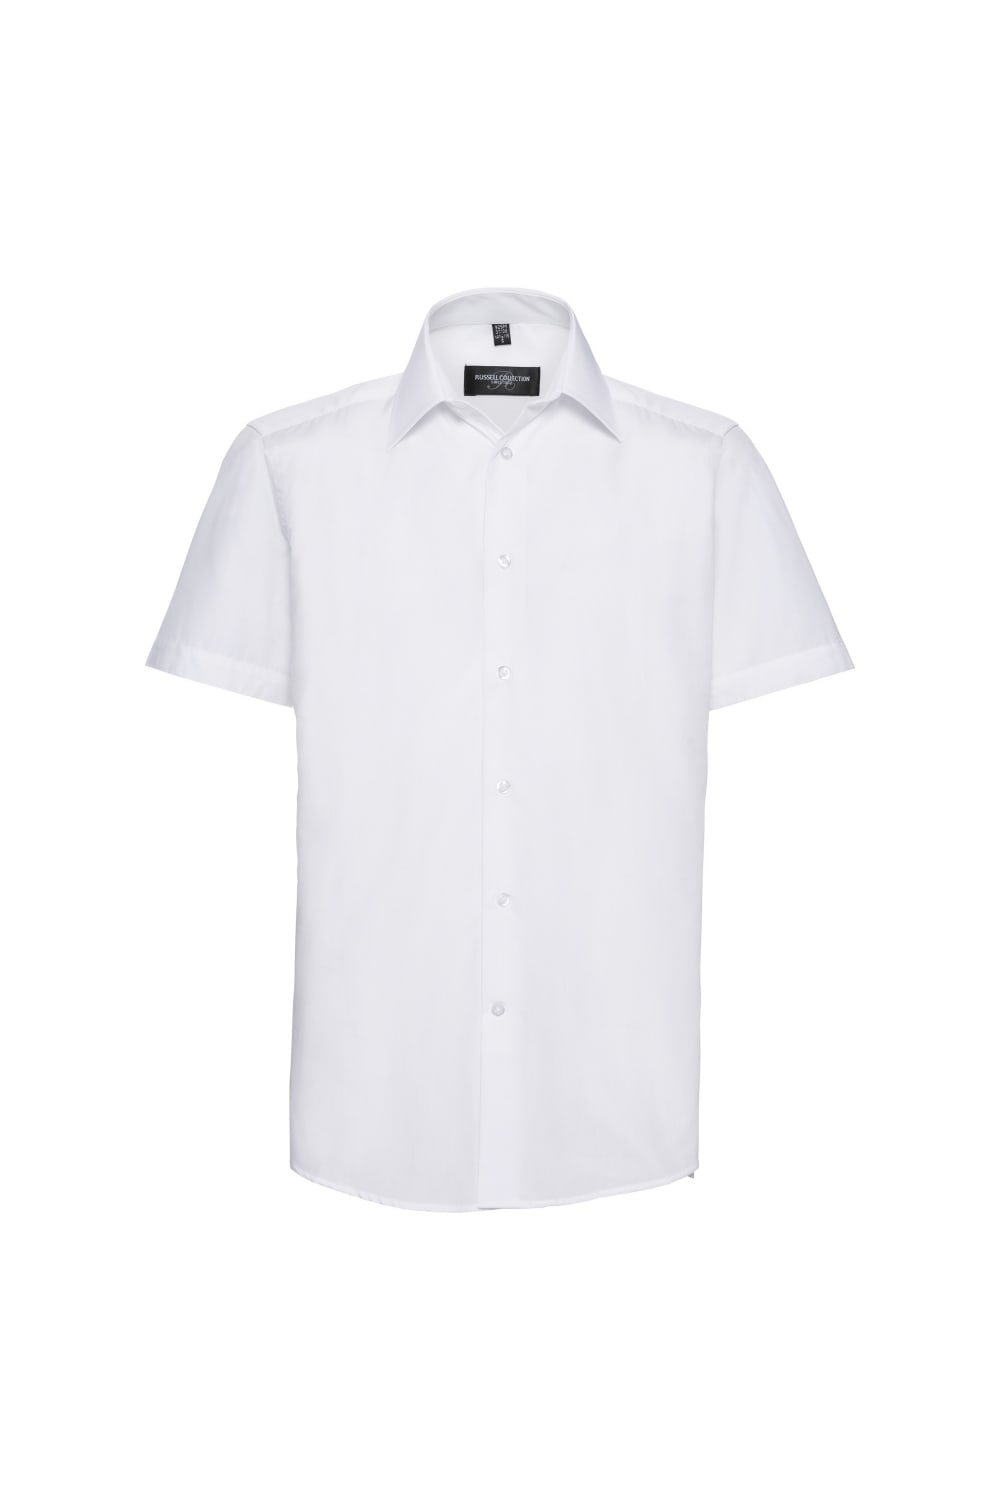 Russell Collection Mens Short Sleeve Poly-Cotton Easy Care Tailored Poplin Shirt (White)